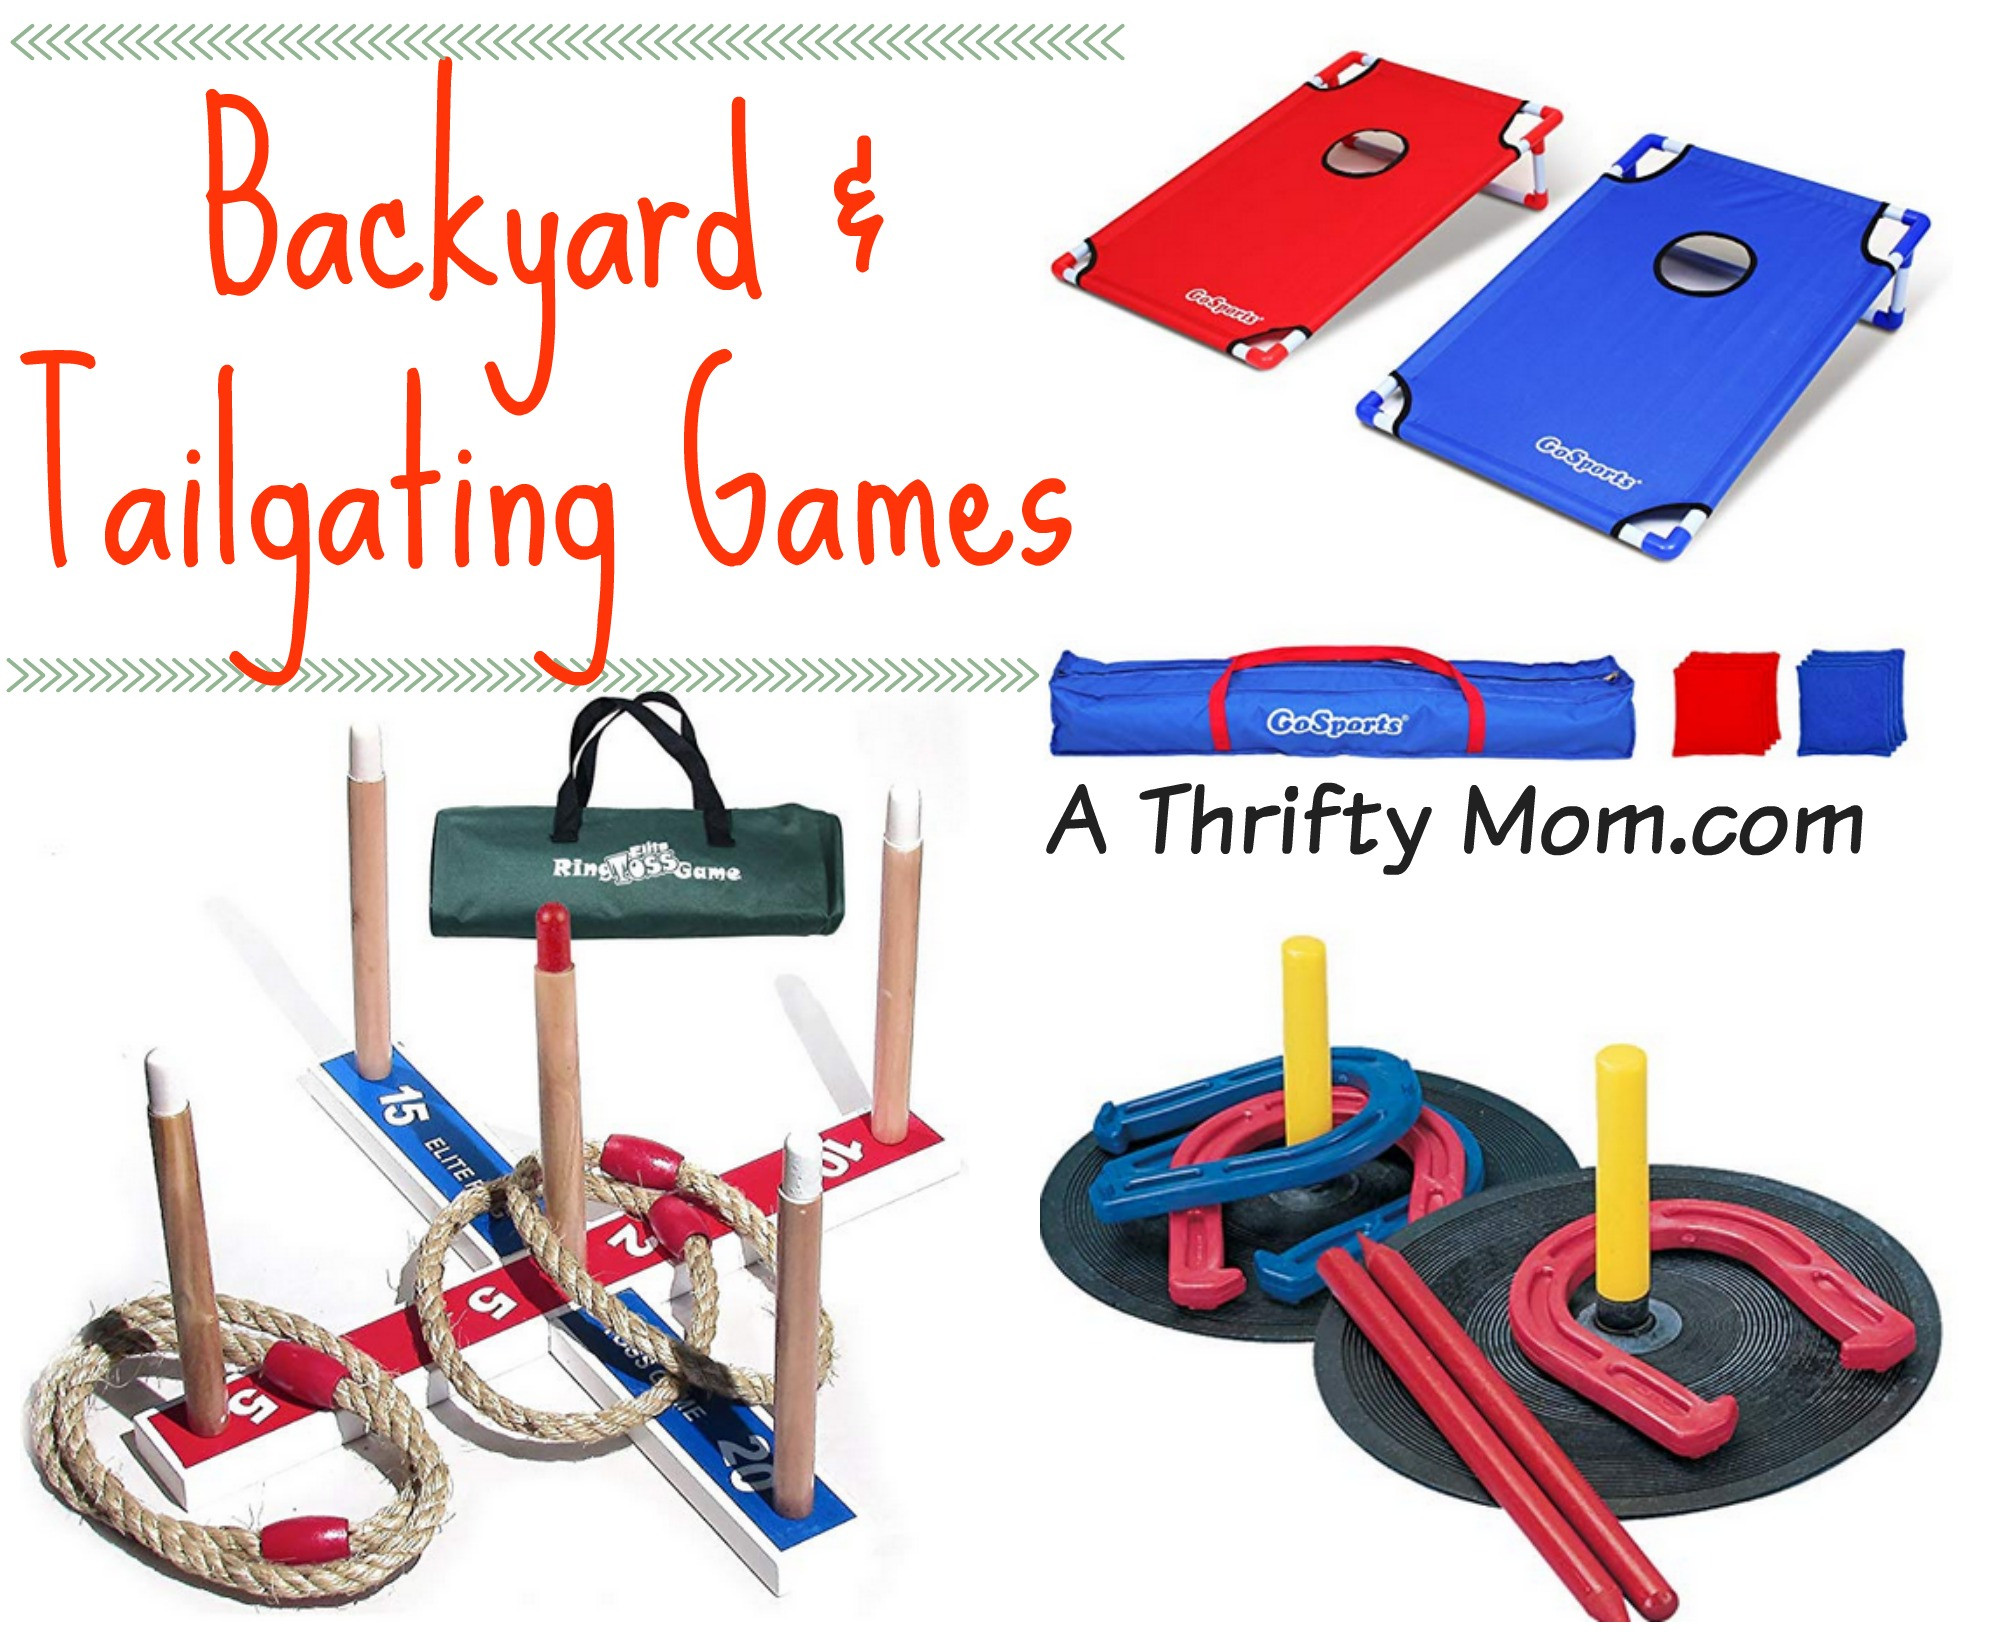 Thrifty Backyard Portable Buildings-Rent-2-Own
 Portable Tailgating & Backyard Games A Thrifty Mom